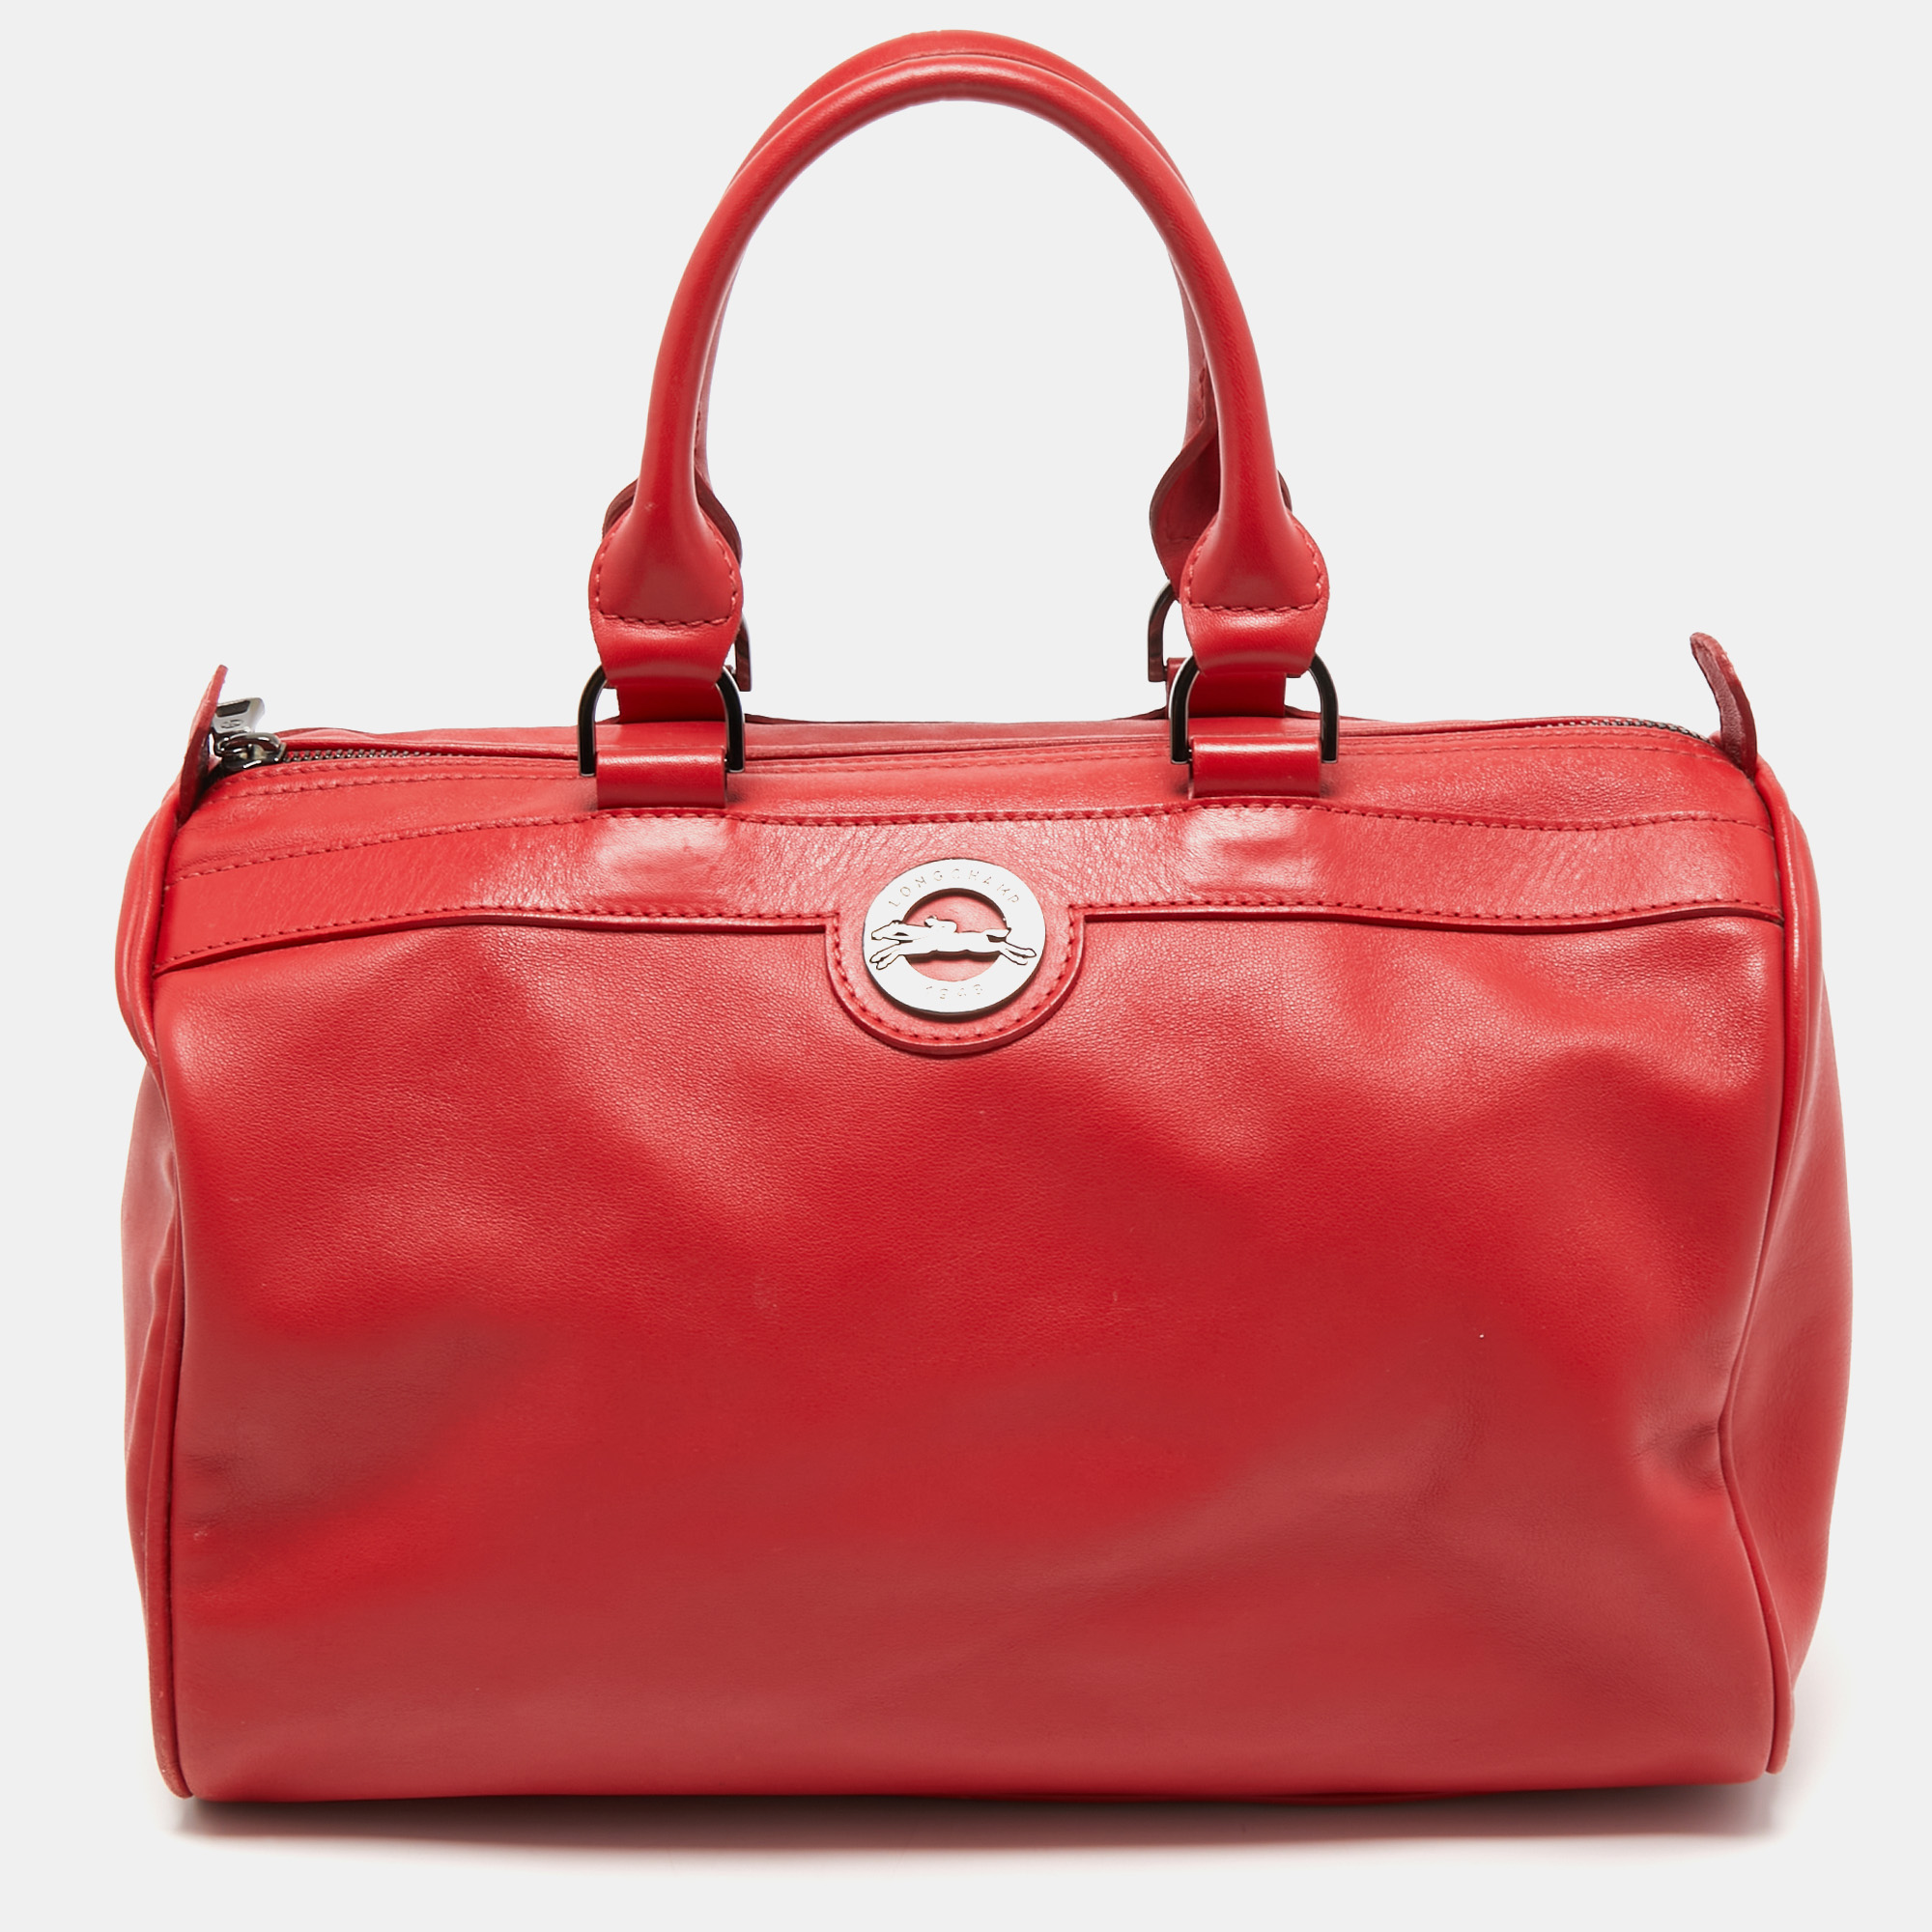 Pre-owned Longchamp Red Leather Boston Bag